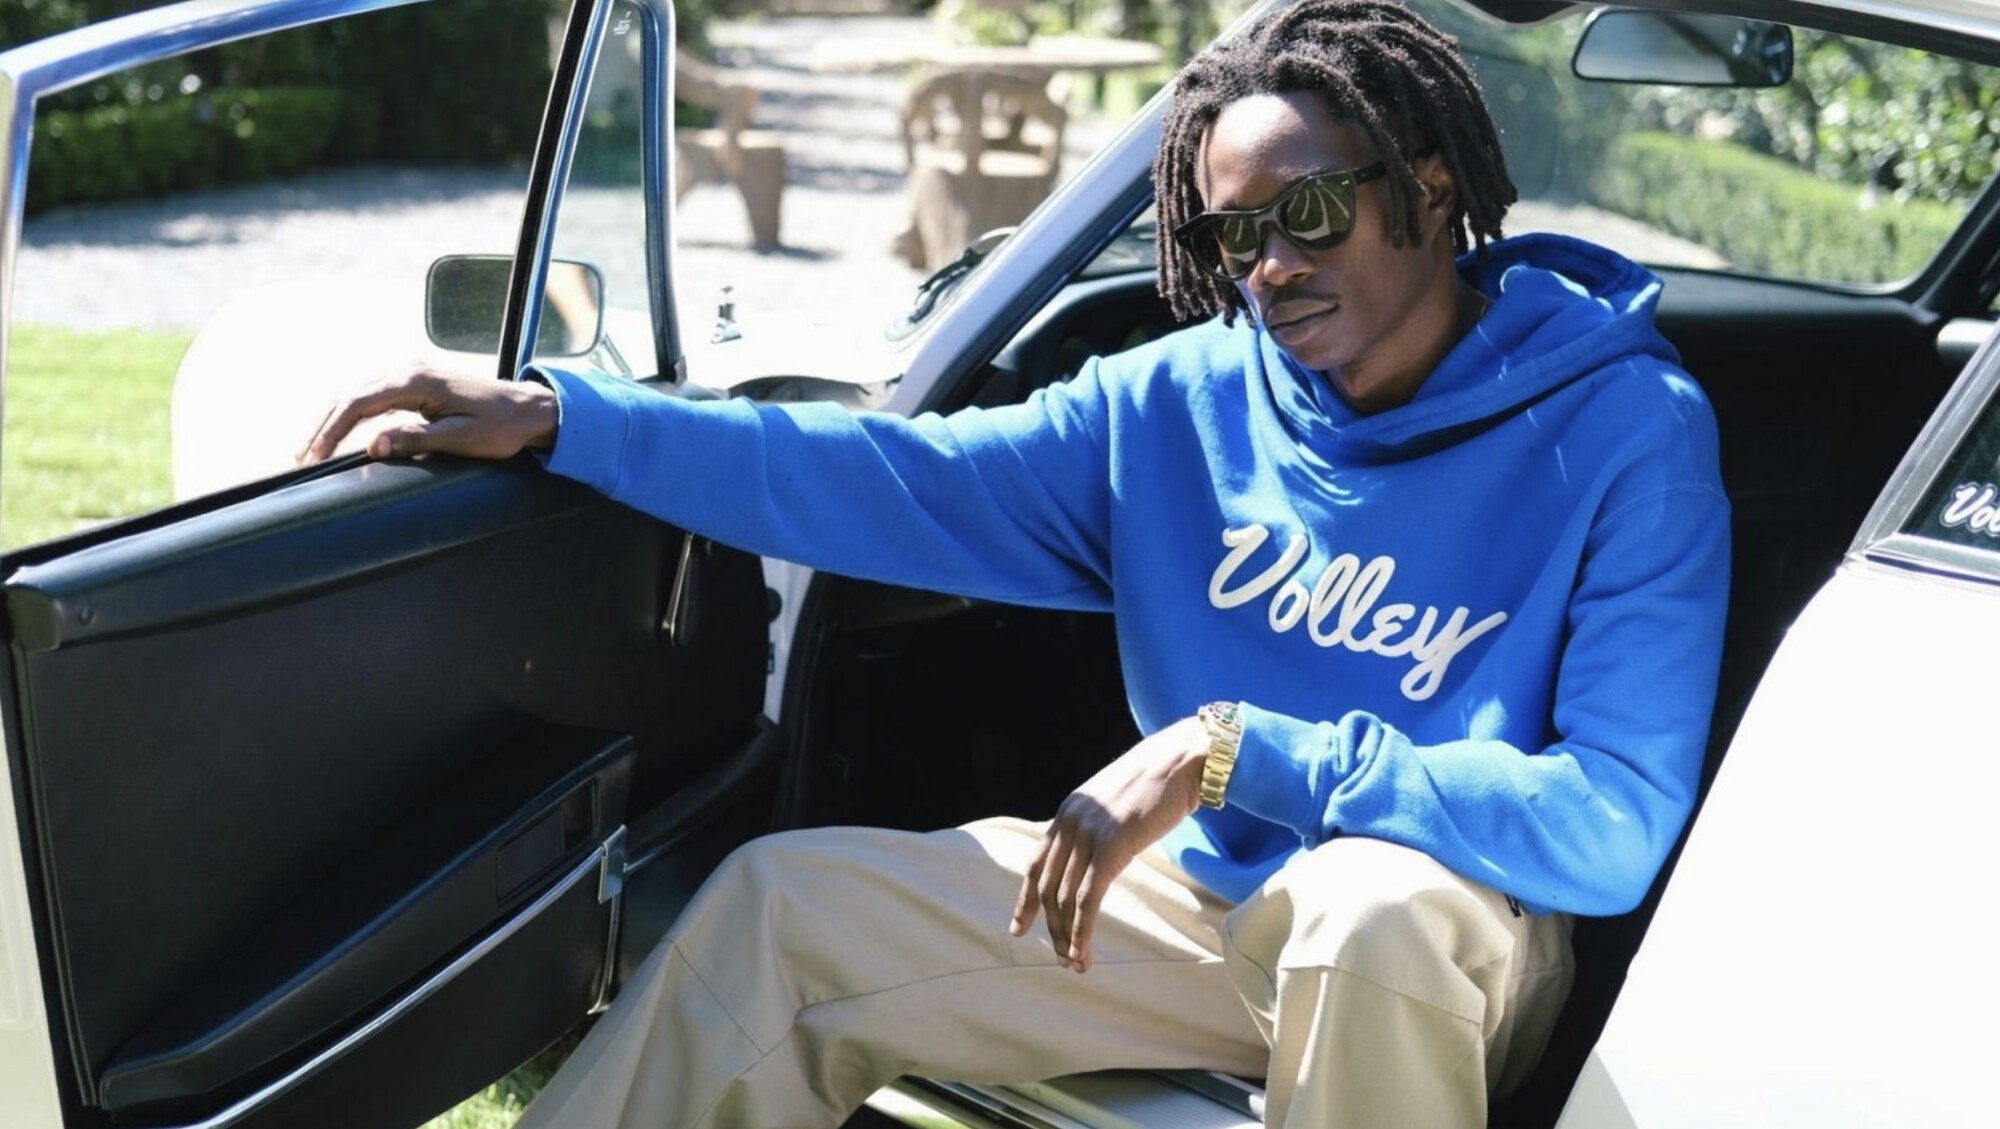 A man sits in a convertible car with the door open, wearing a blue hoodie with the word "Stolen" in white writing.